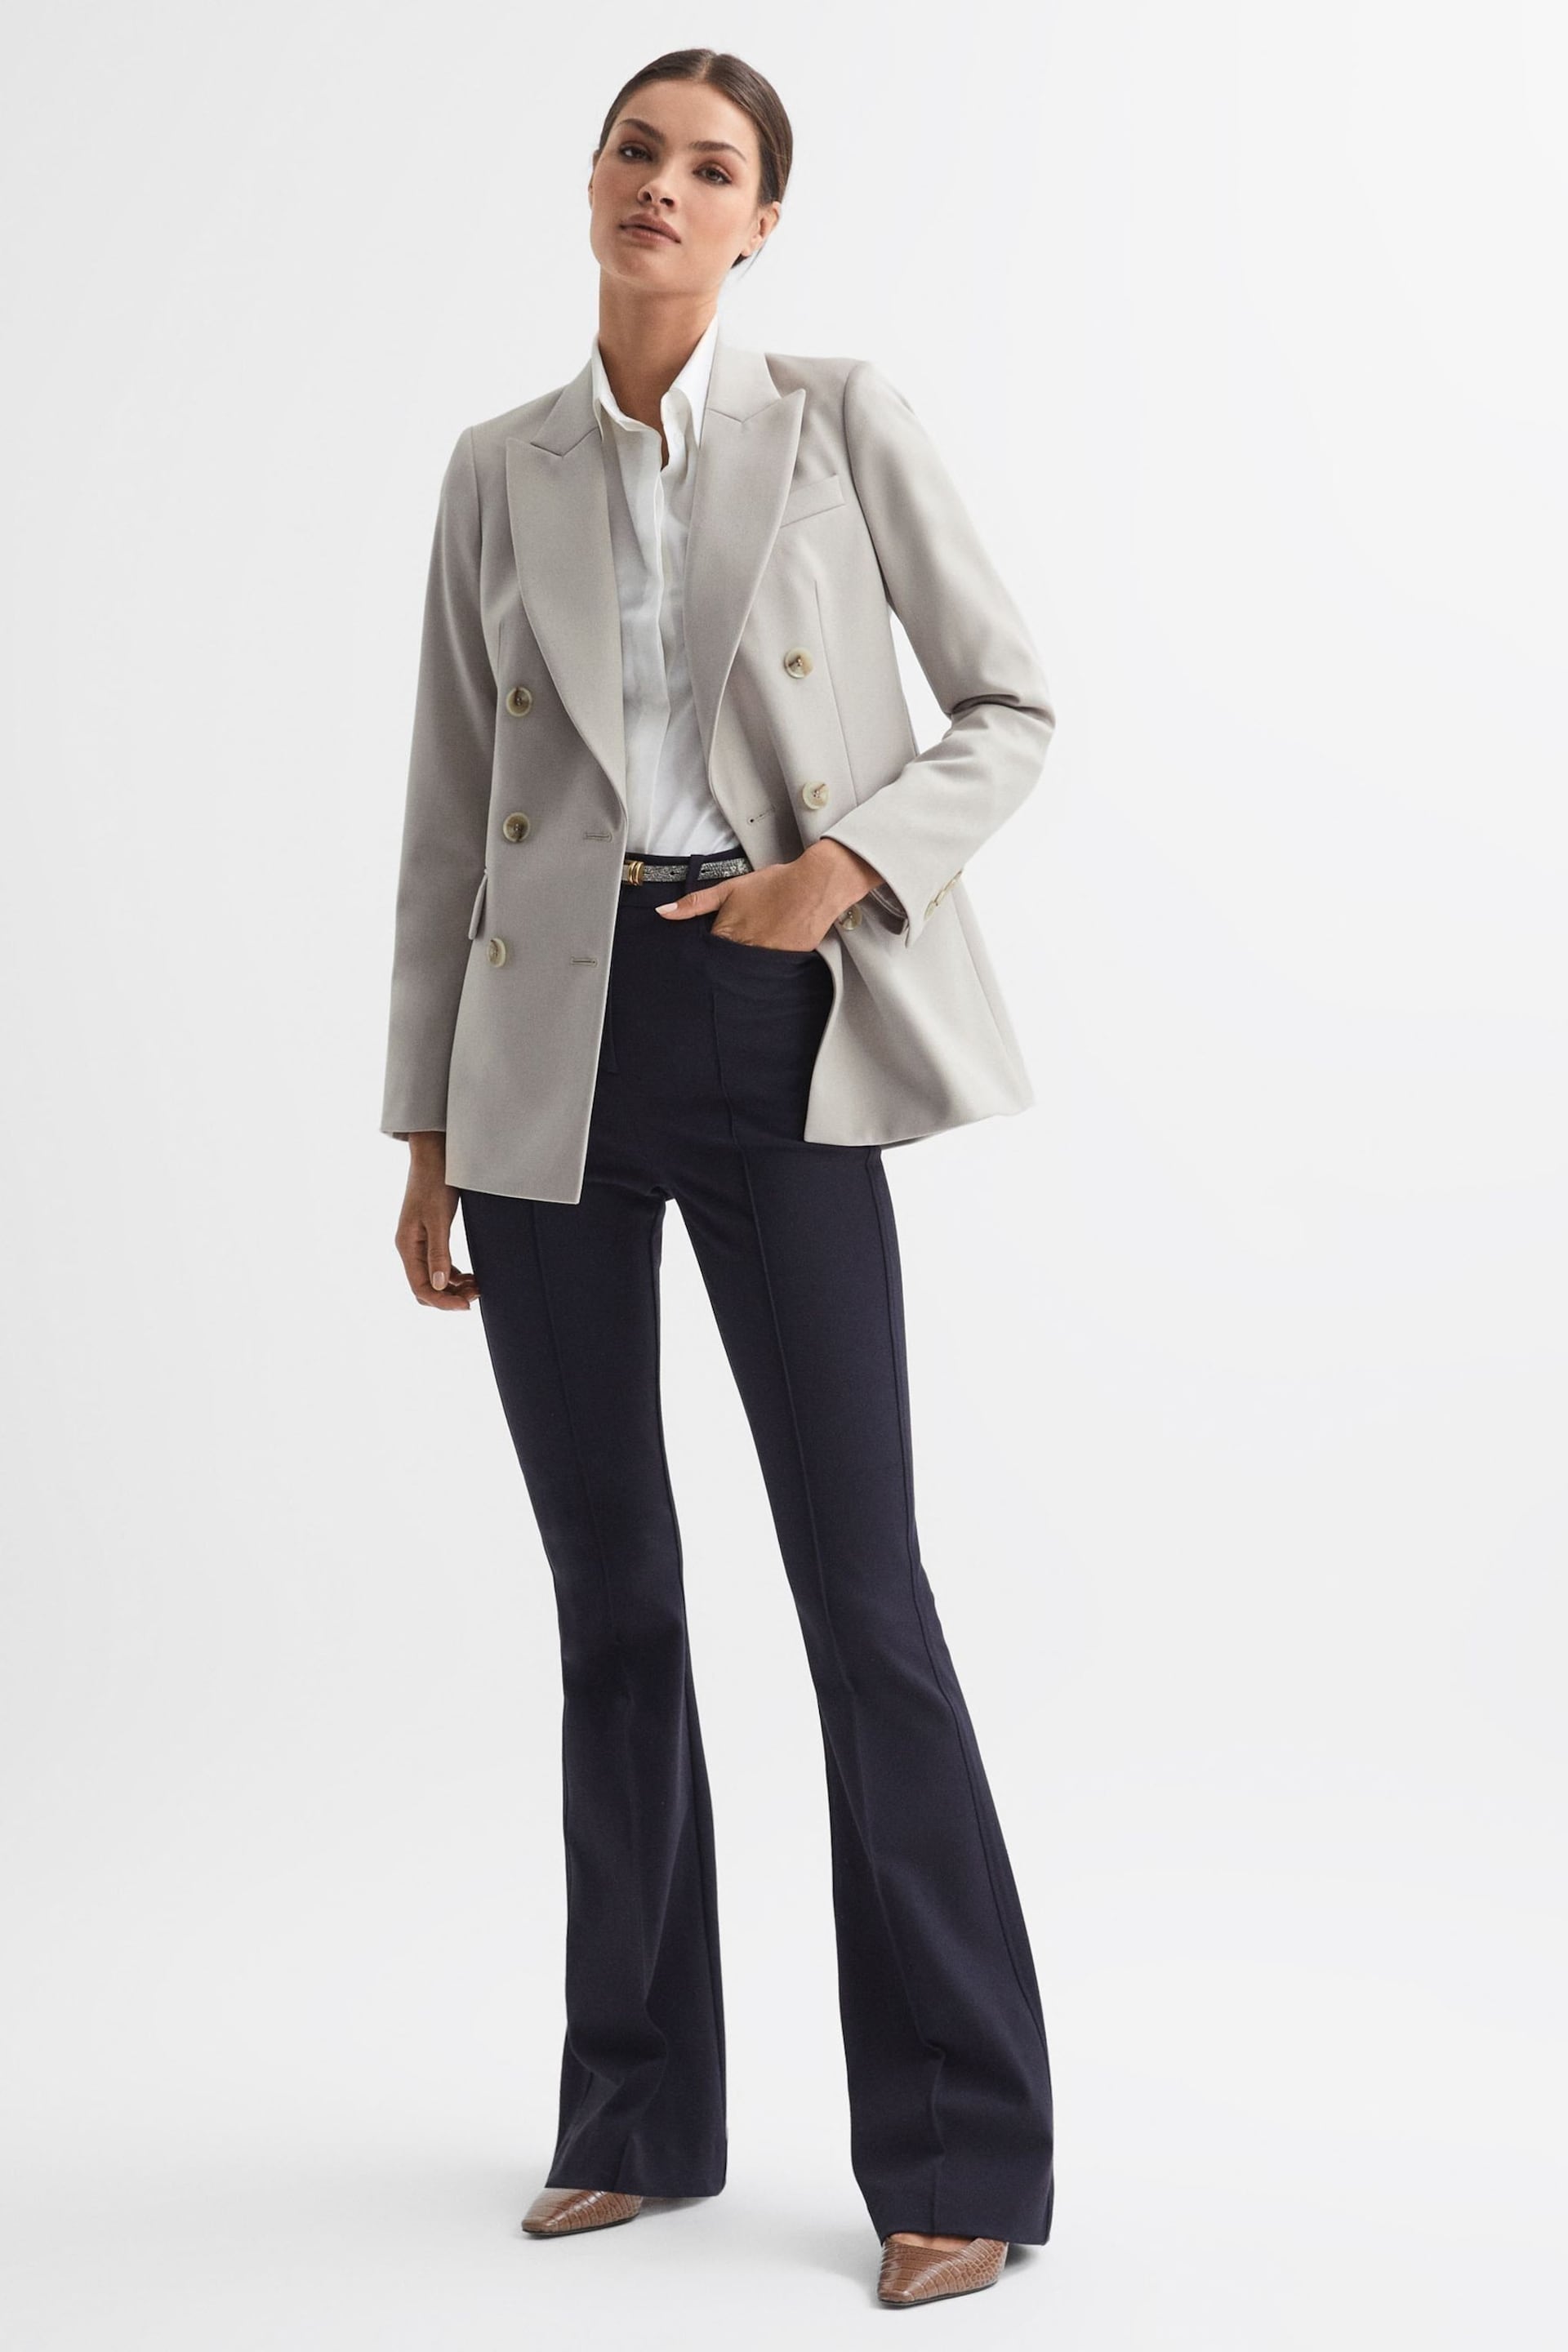 Reiss Neutral Astrid Petite Double Breasted Wool Blend Blazer - Image 5 of 6